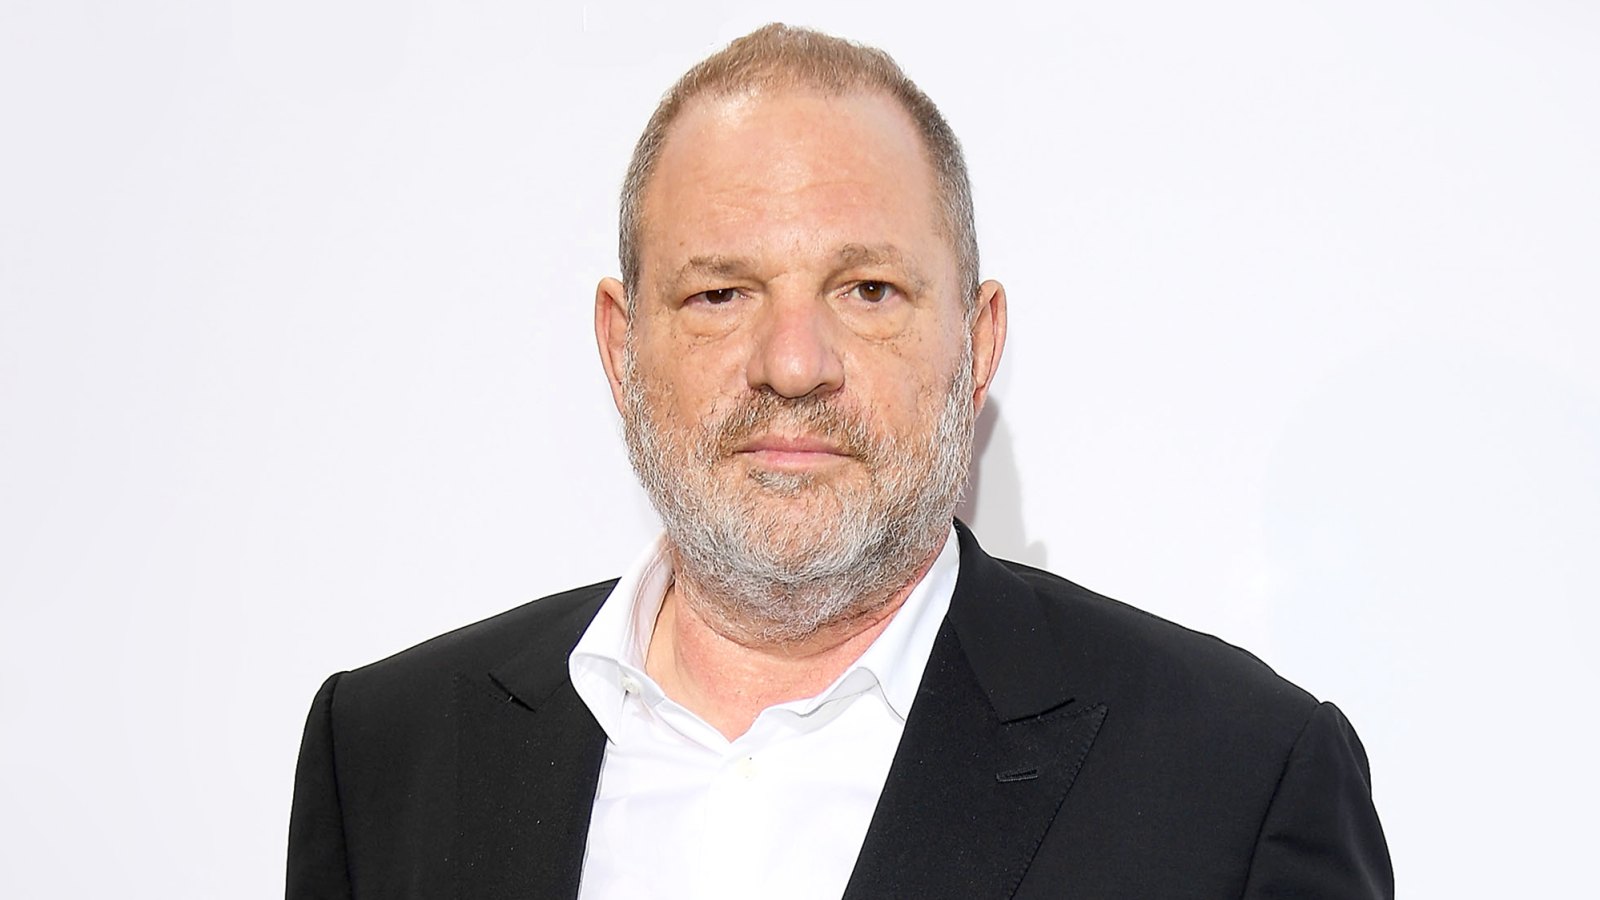 Harvey Weinstein attend the 70th annual Cannes Film Festival at Hotel du Cap-Eden-Roc in Cap d'Antibes, France.